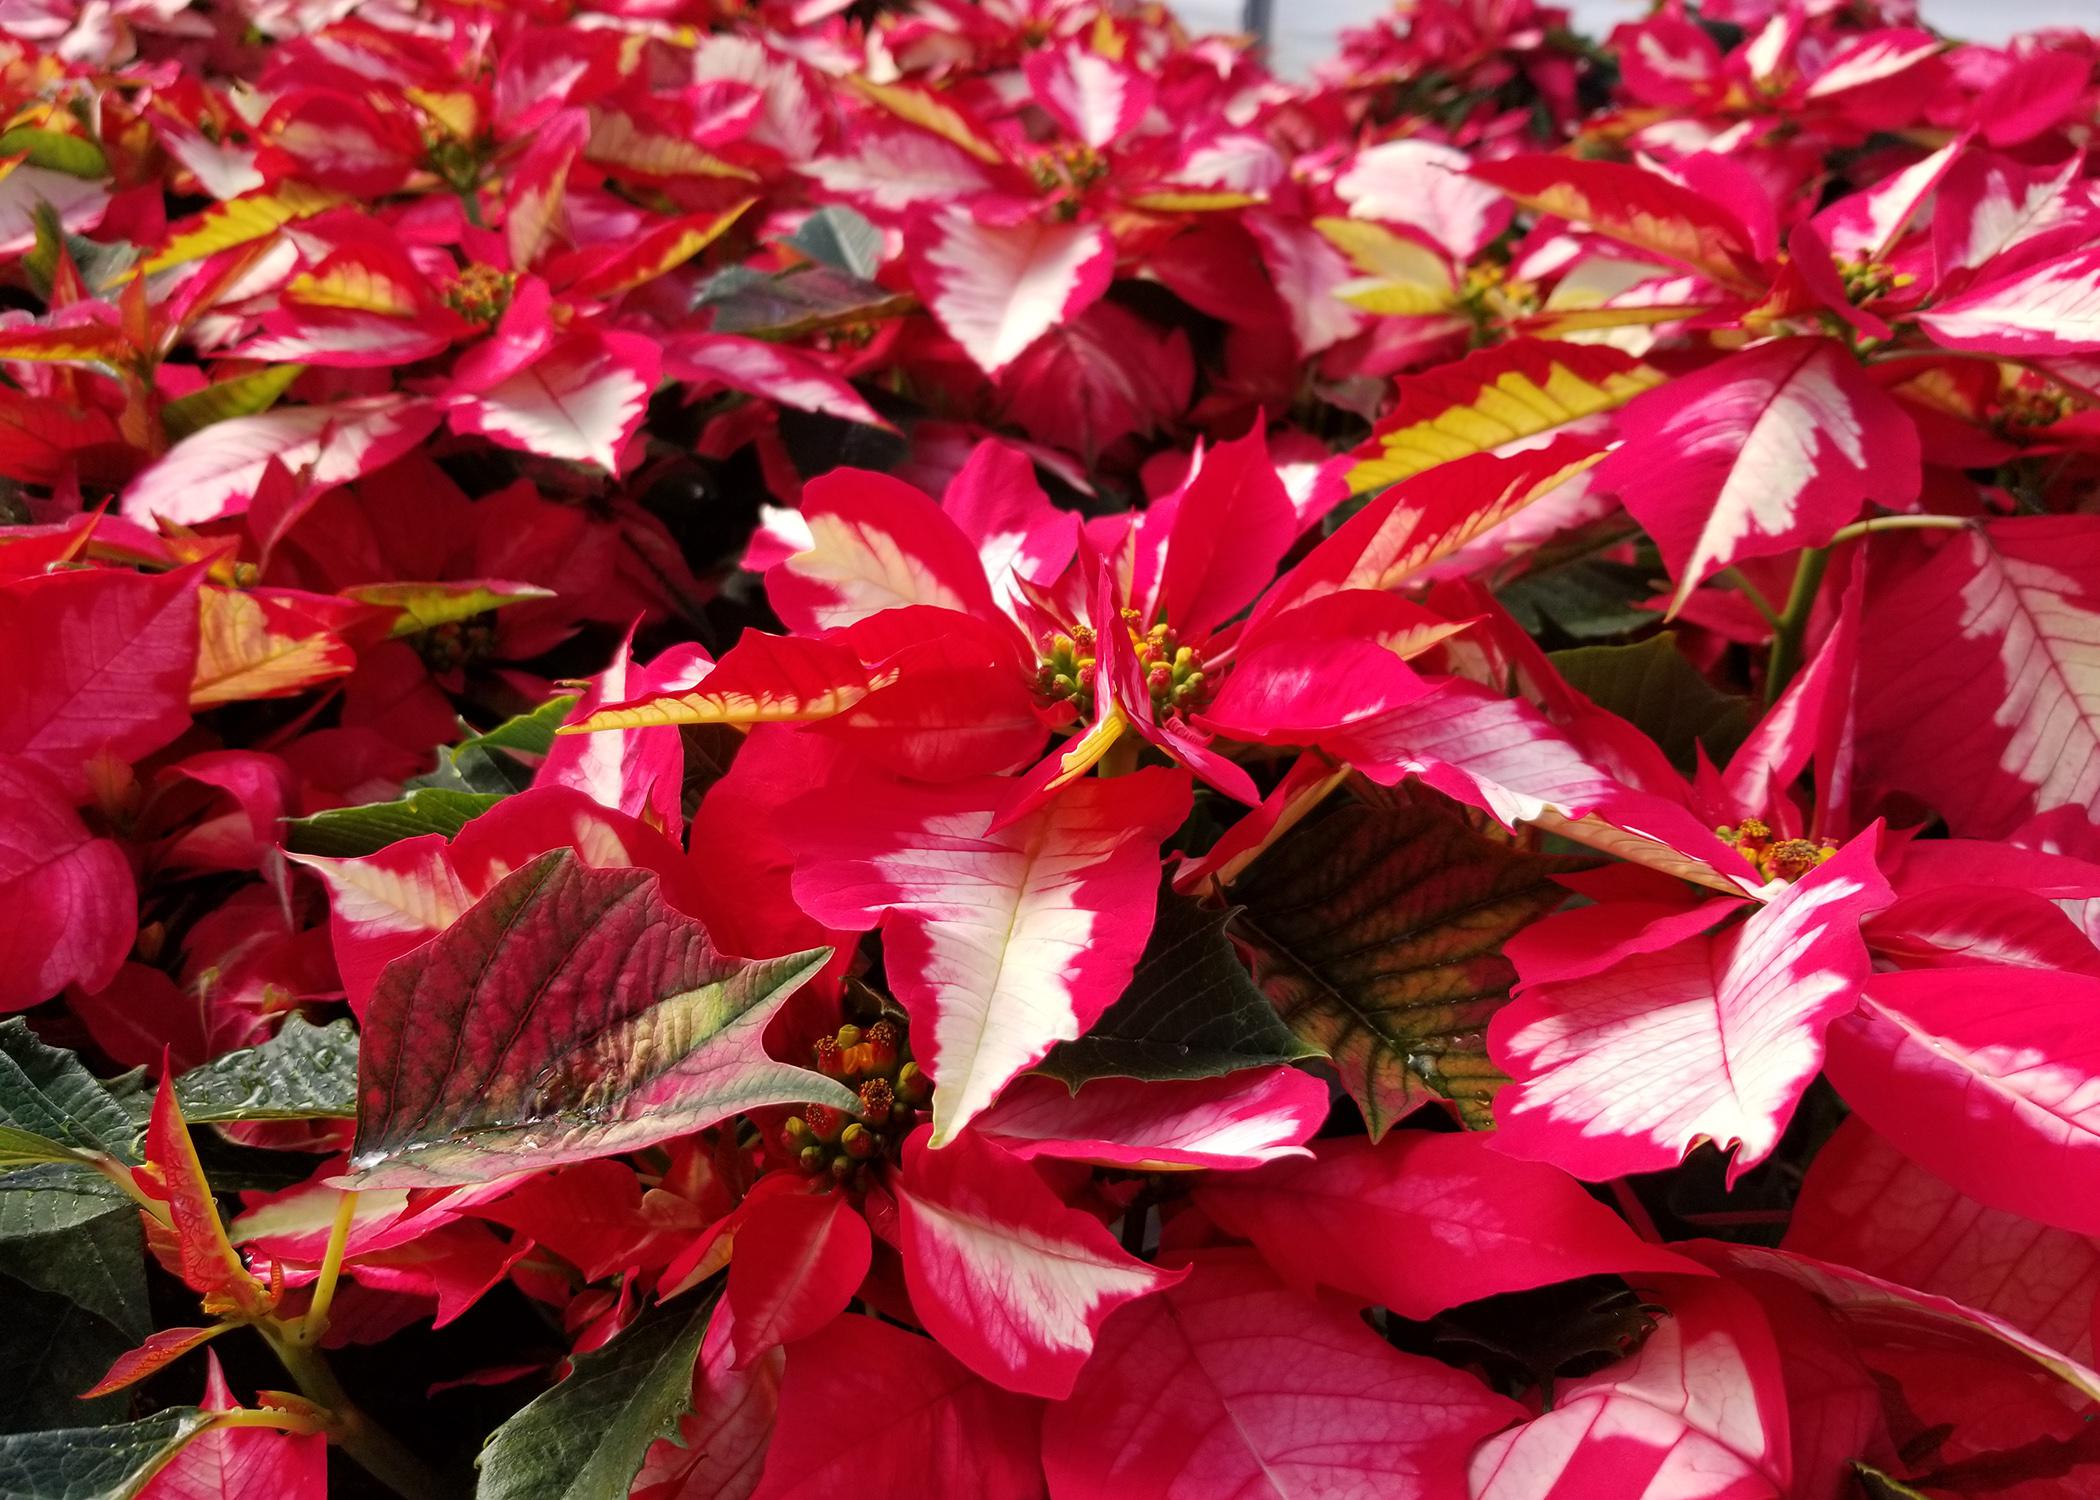 Red poinsettia leaves sport white centers.